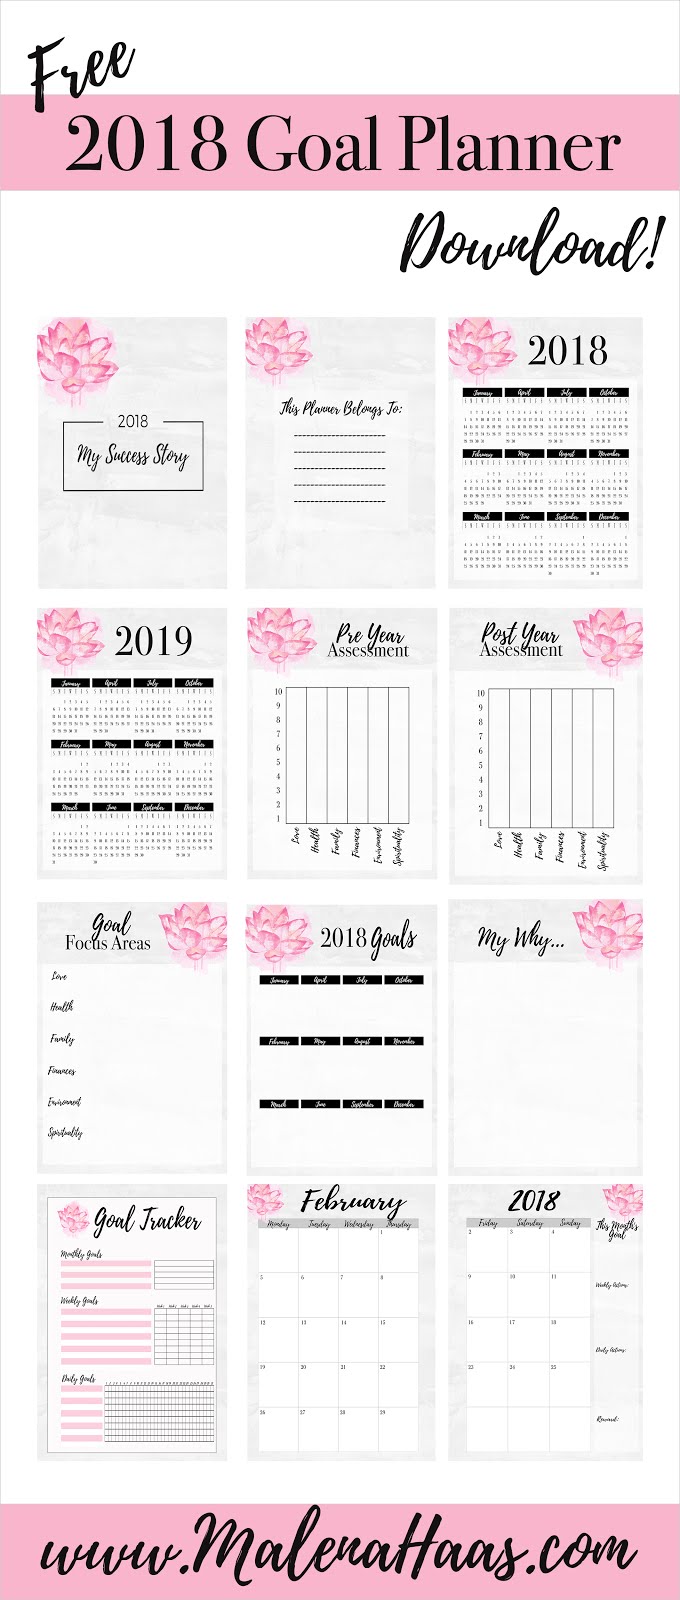  Ultimate 2018 Goal Planning Inserts For Planner Download in Pink and Grey